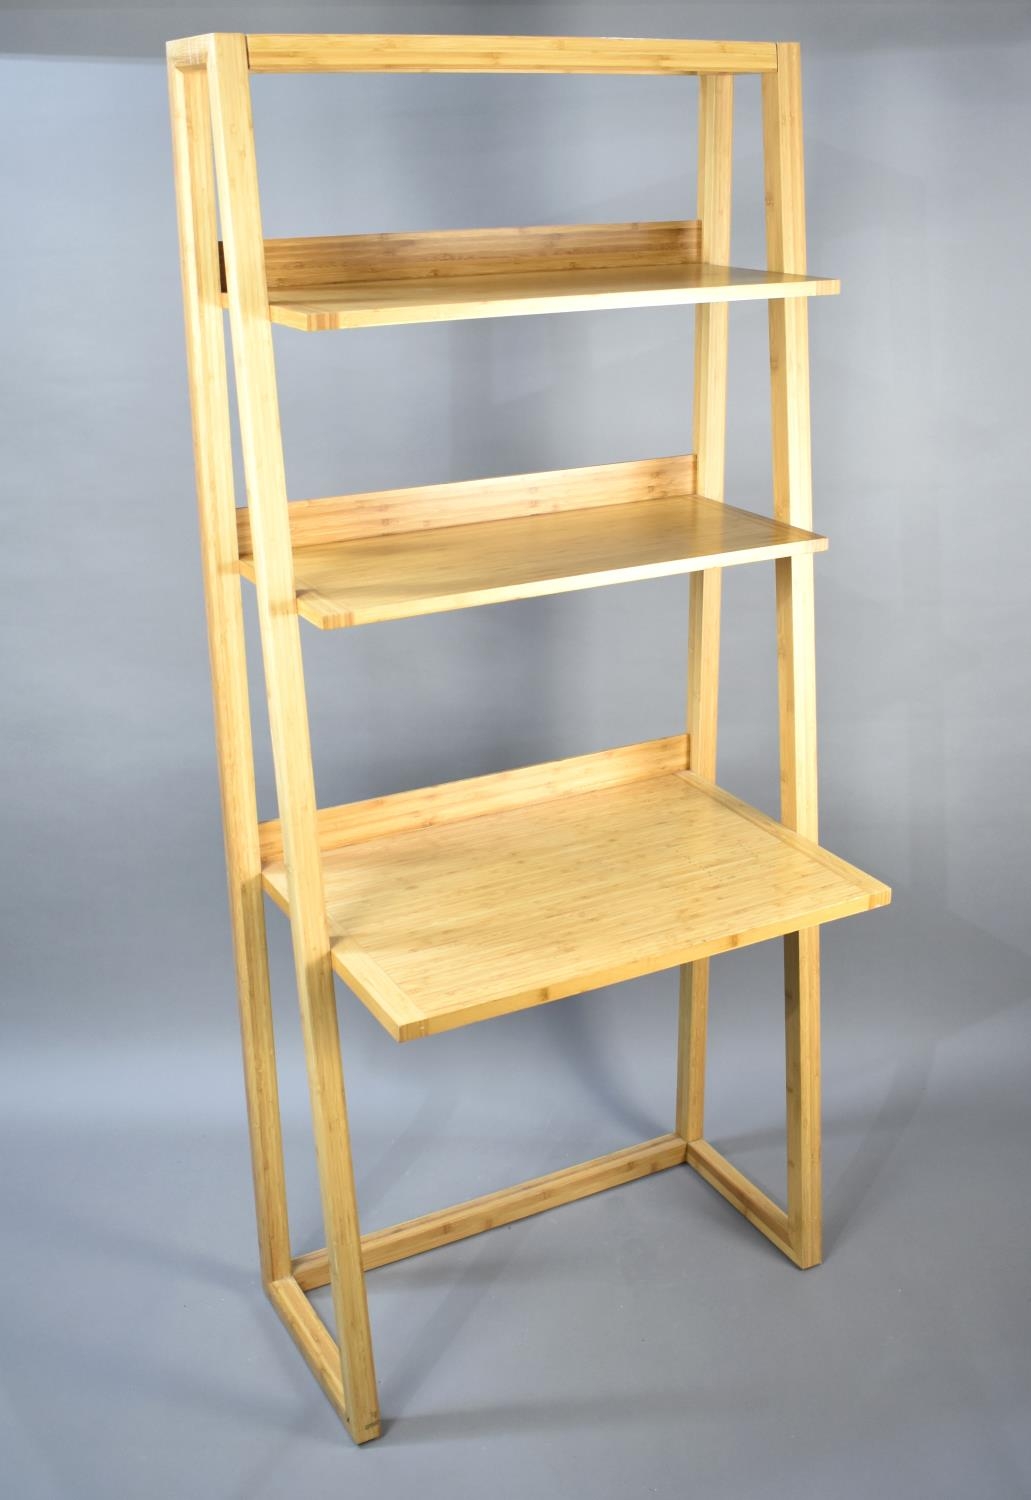 A Modern Three Shelf Waterfall Stand or Desk, 80cms Wide and 182cms High